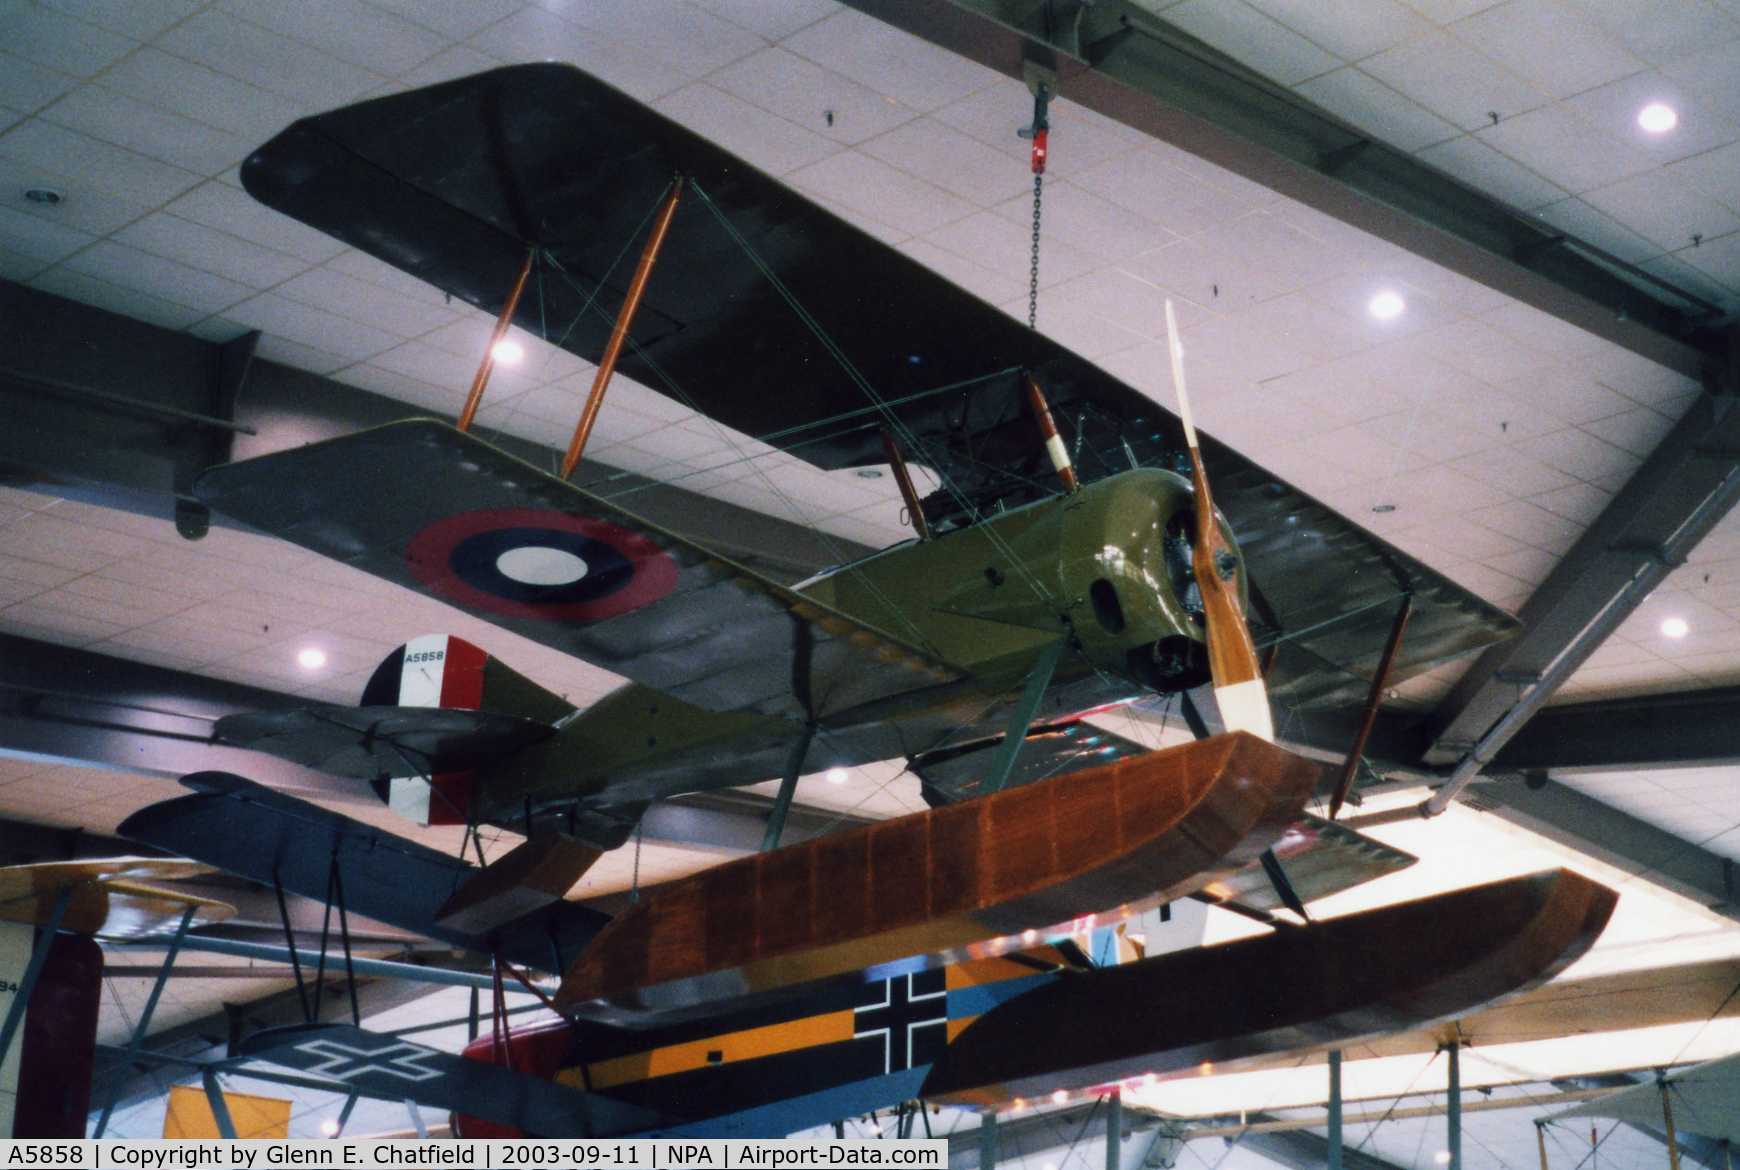 A5858, 1918 Thomas-Morse S-4C-1 Scout C/N 235, Thomas Morse S.4C at the National Museum of Naval Aviation